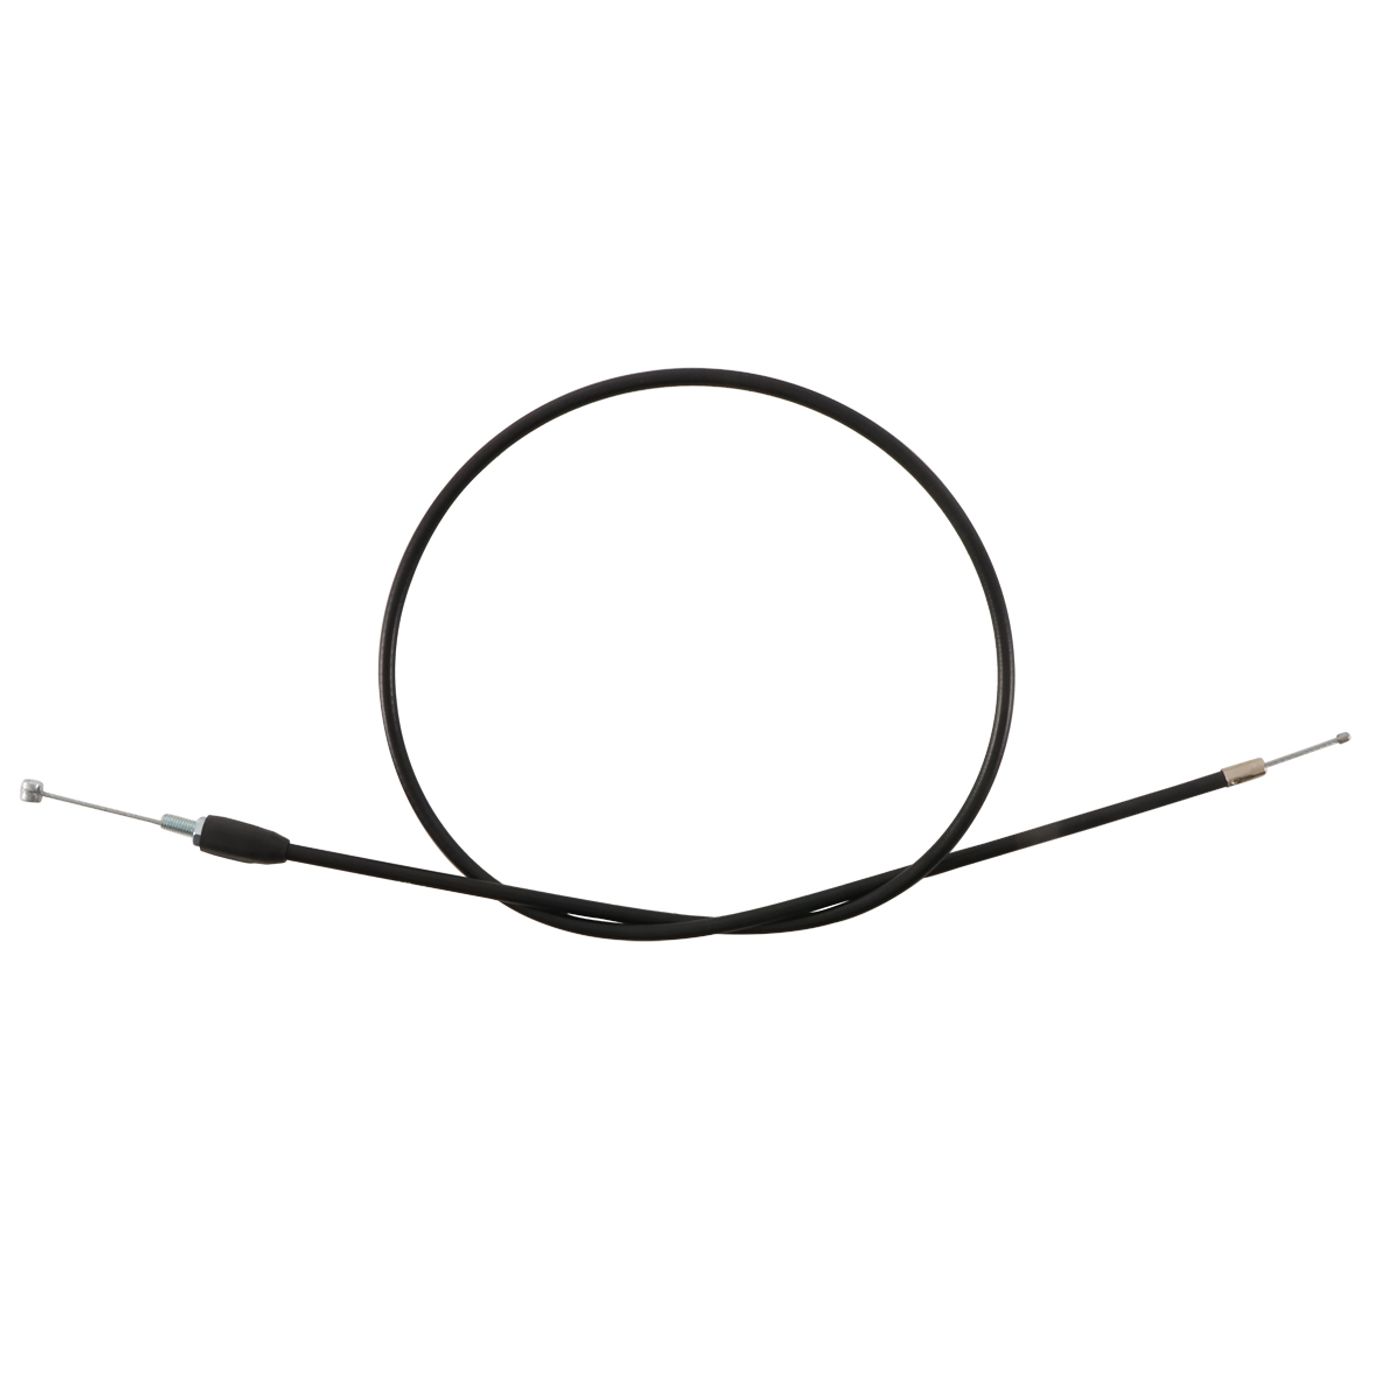 Wrp Clutch Cables - WRP453008 image